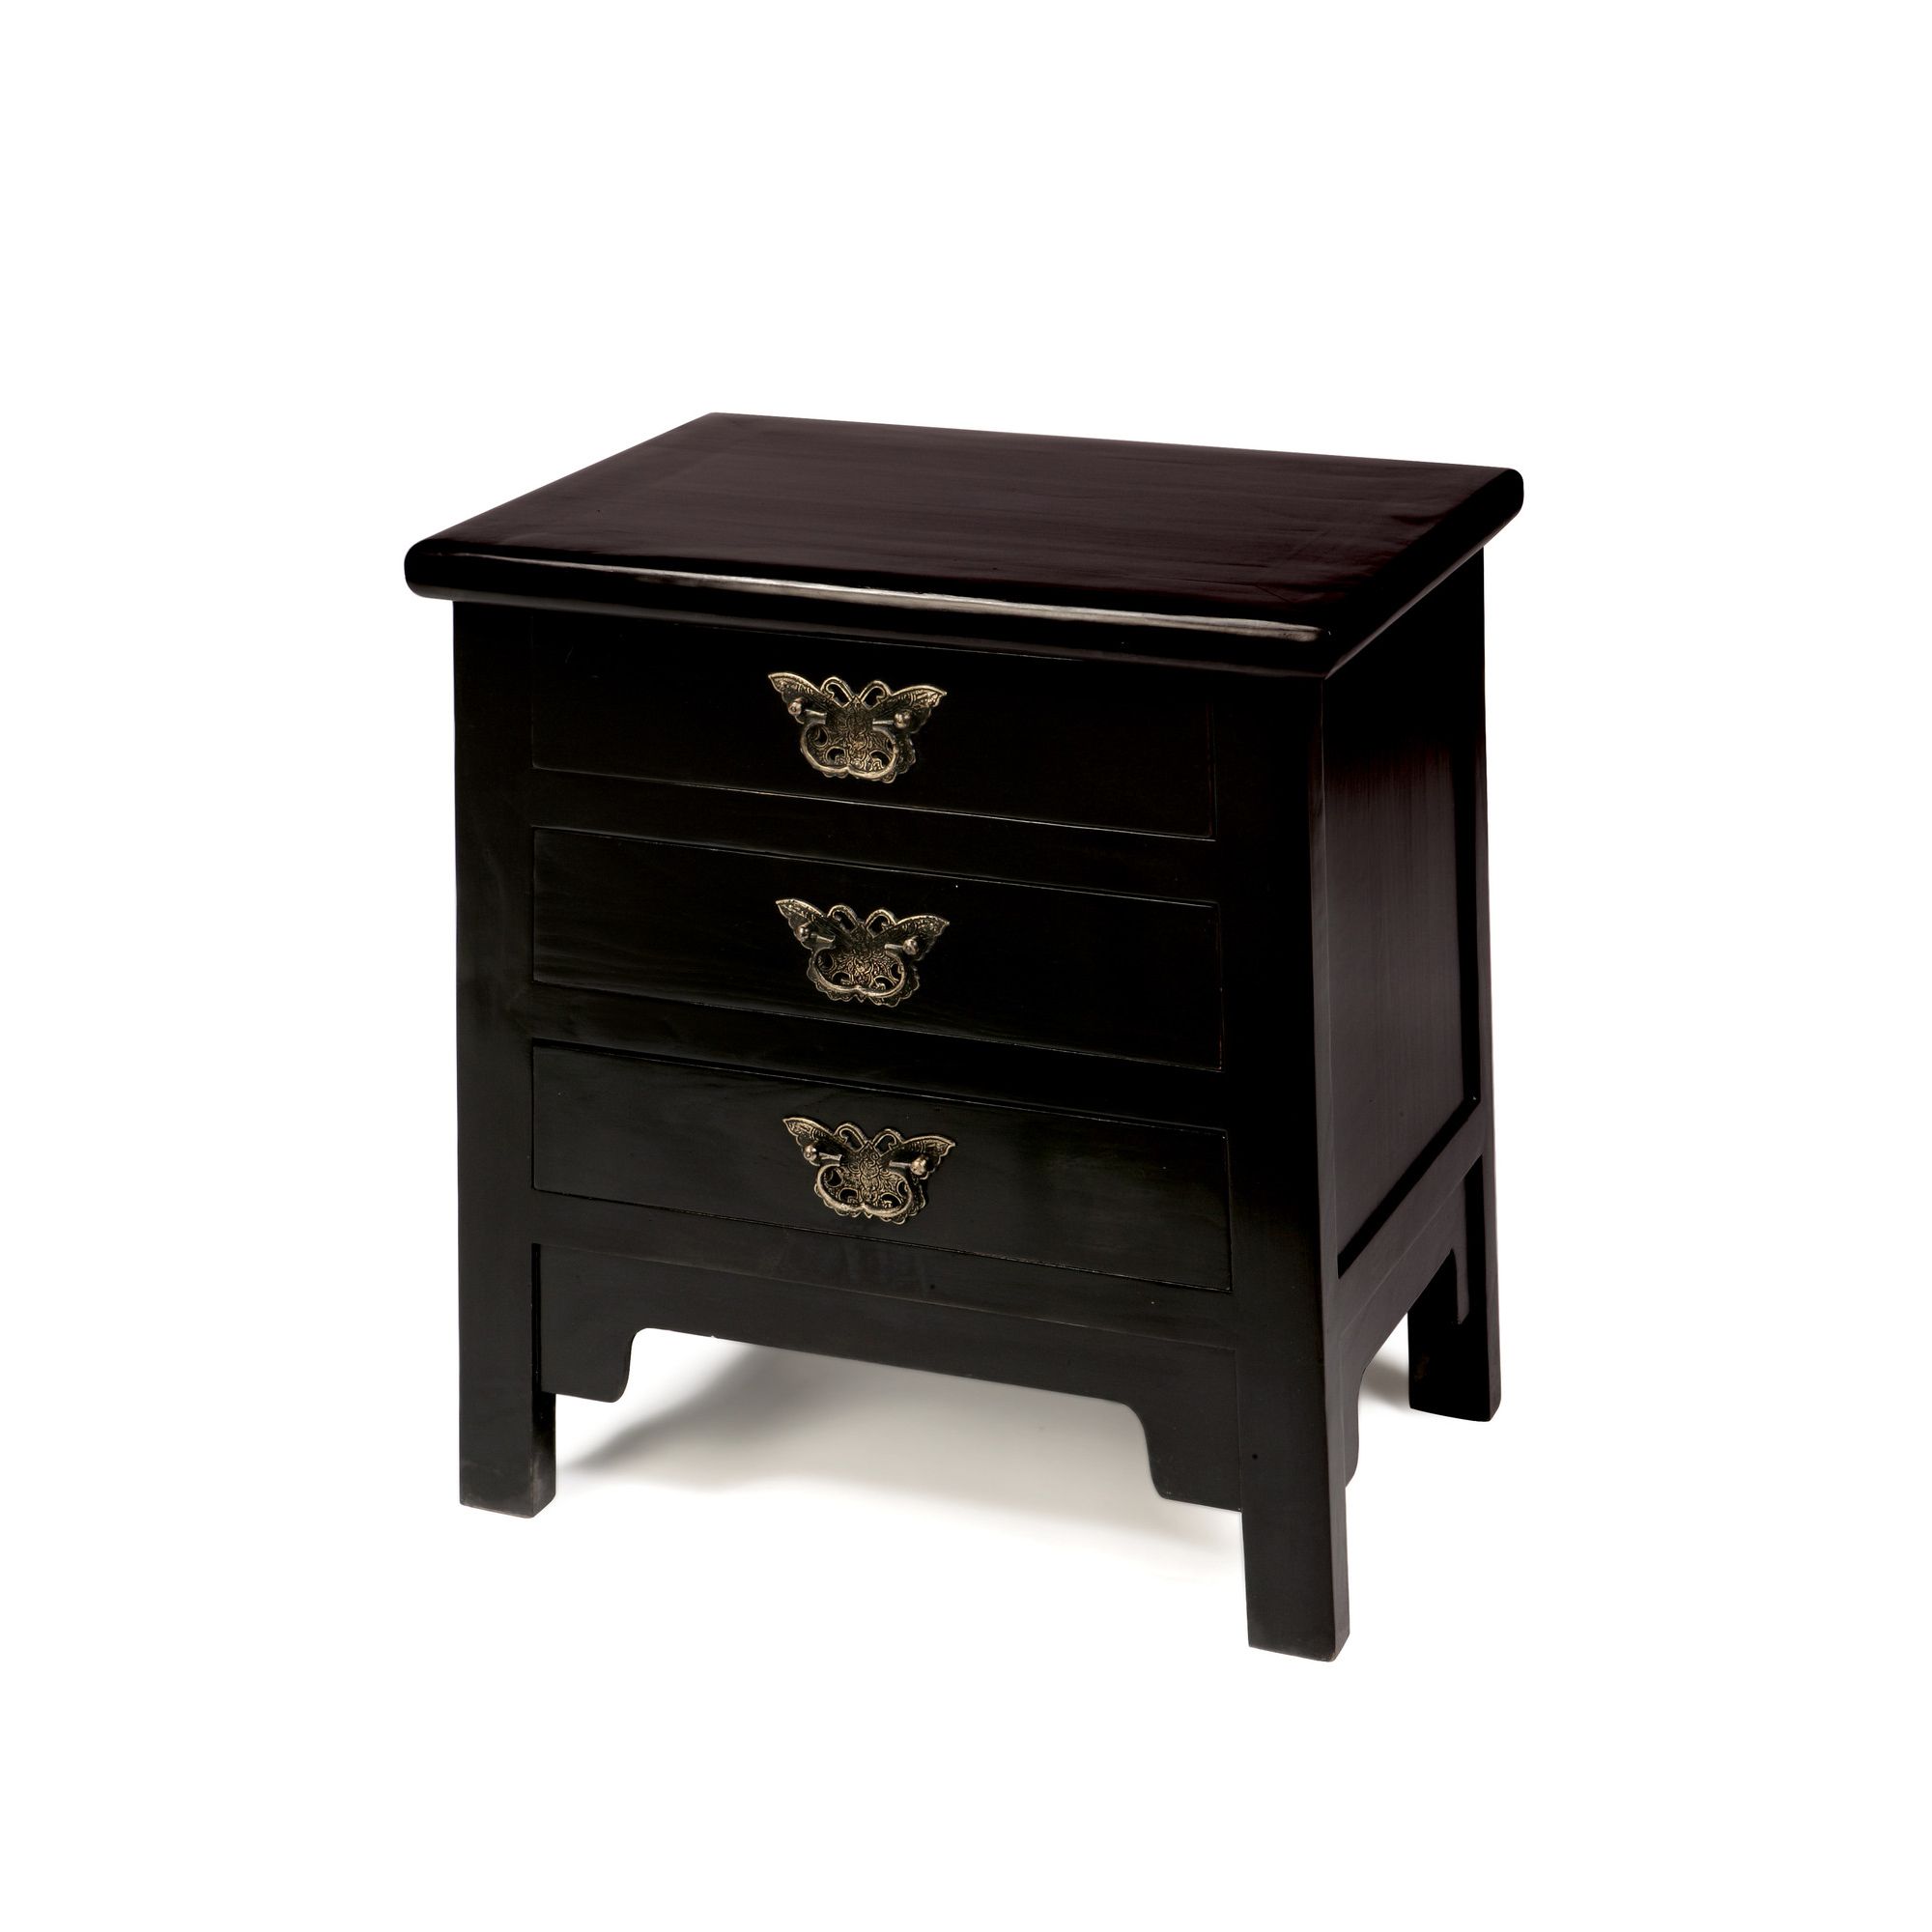 Shimu Chinese Classical Butterfly Drawers - Black Lacquer at Tesco Direct